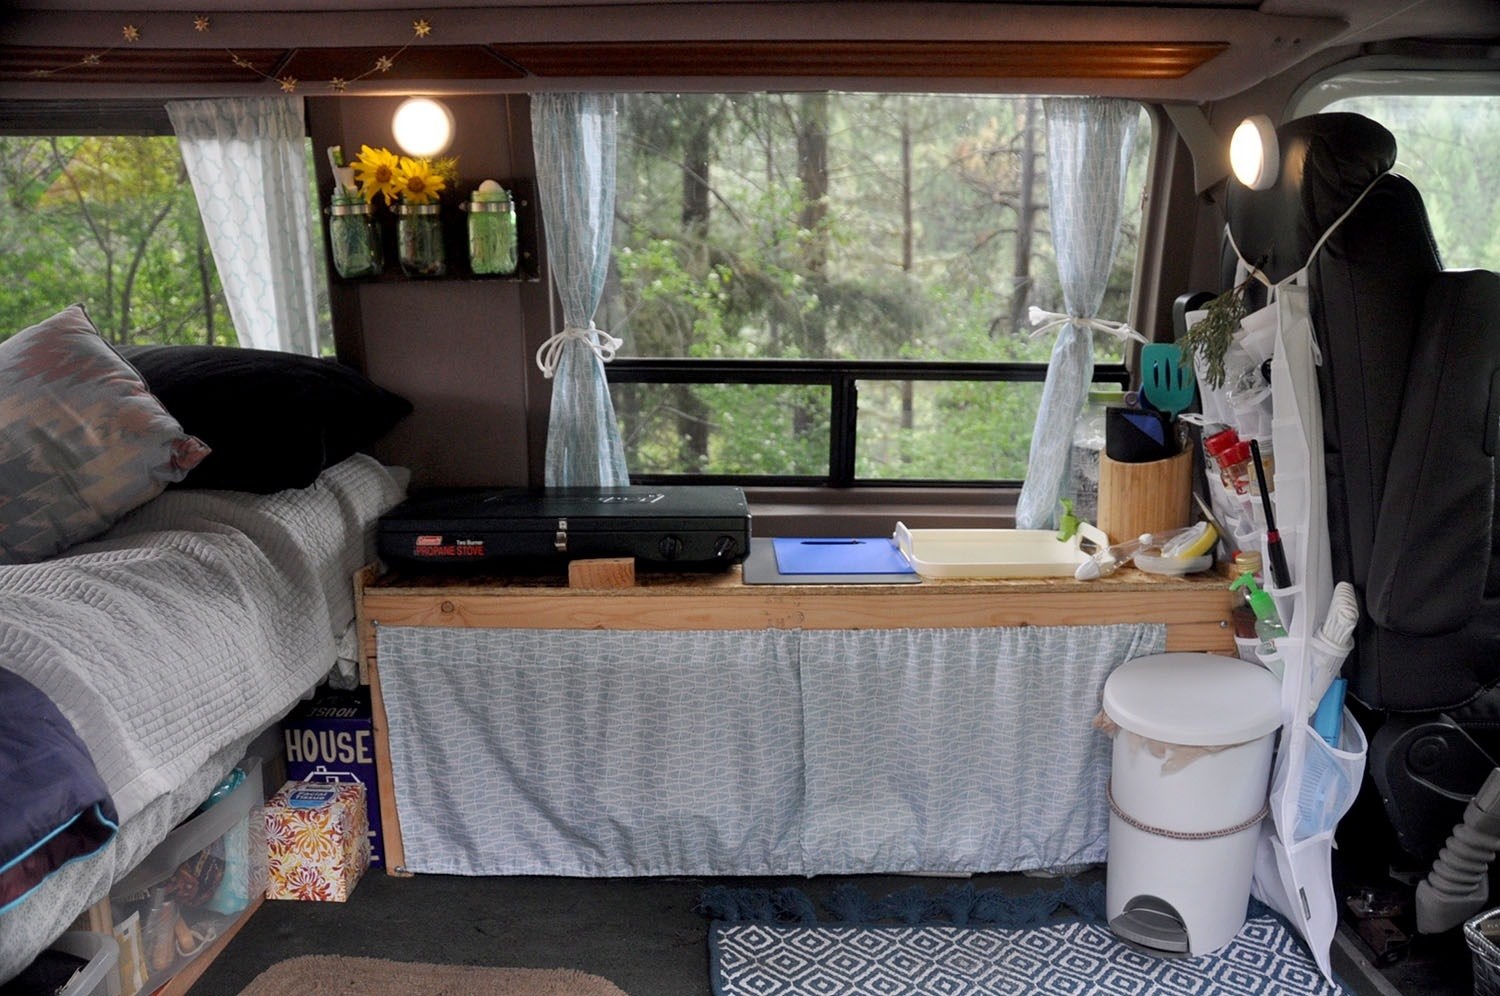 PROJECT OF THE WEEK: A convenient kitchen for campers